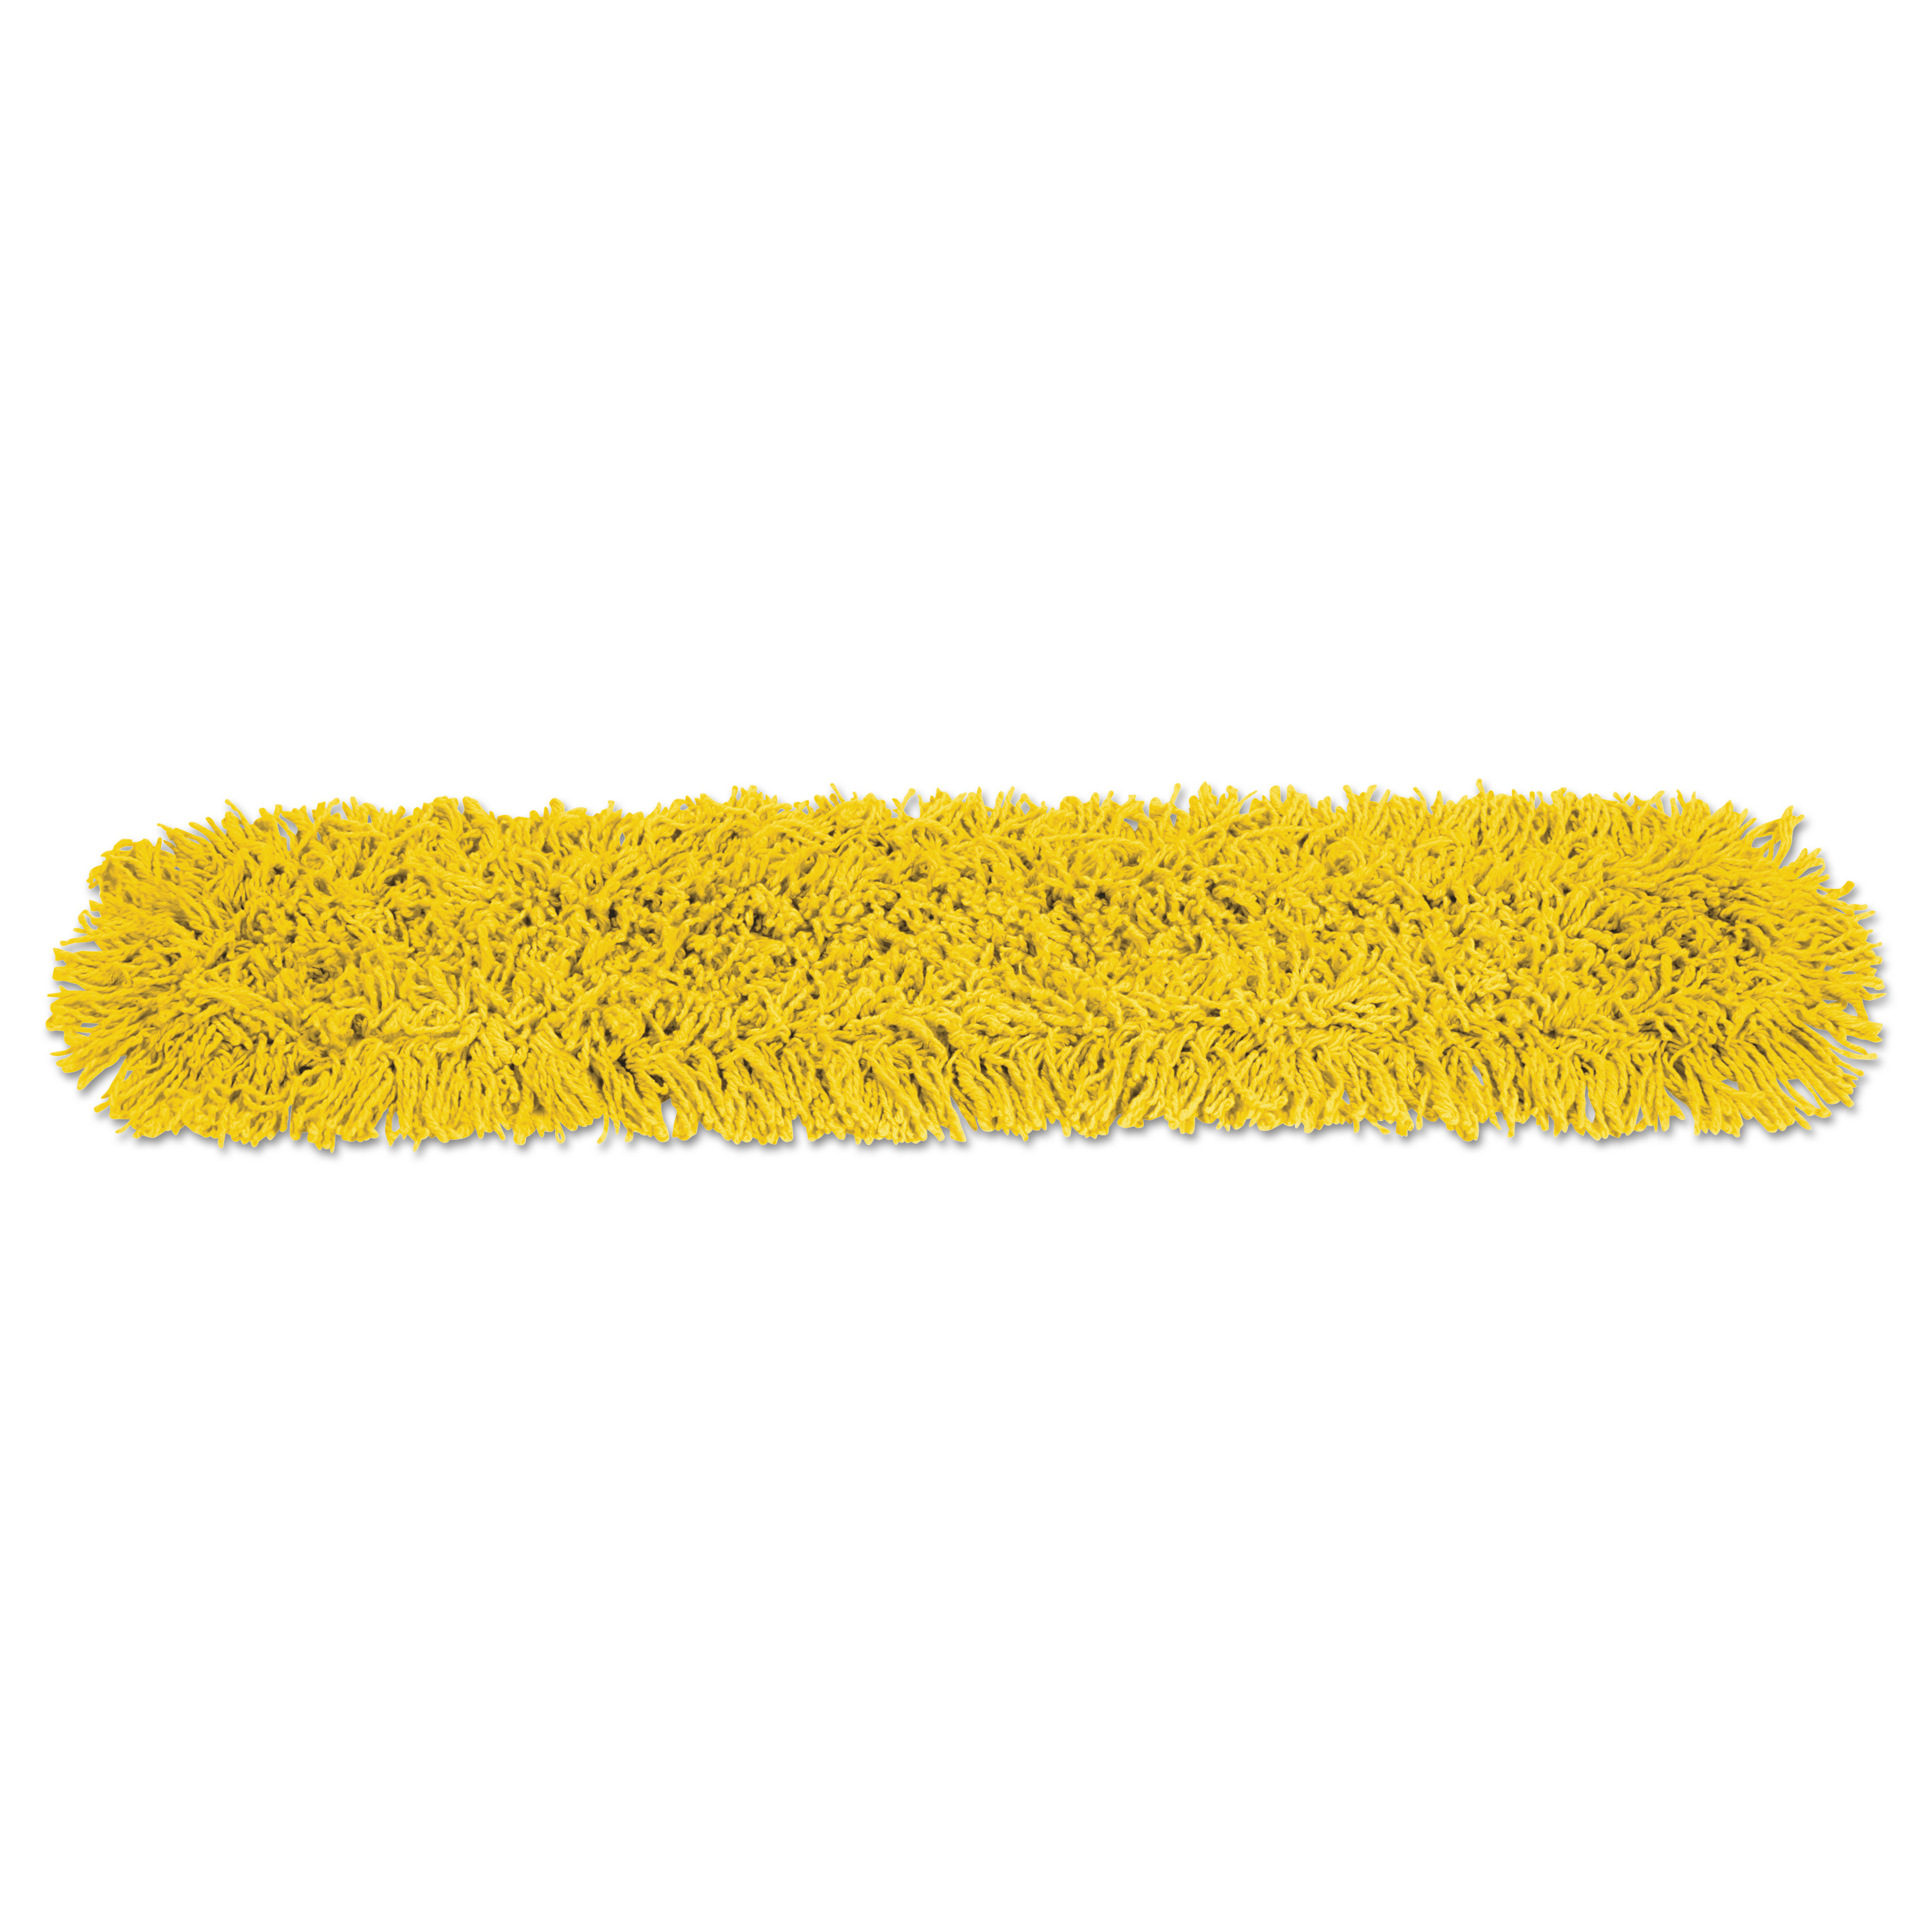  Rubbermaid Commercial 2018821 Maximizer Dust Mop Pad, 36 x 5.5 x 0.5, Yellow (RCP2018821) 